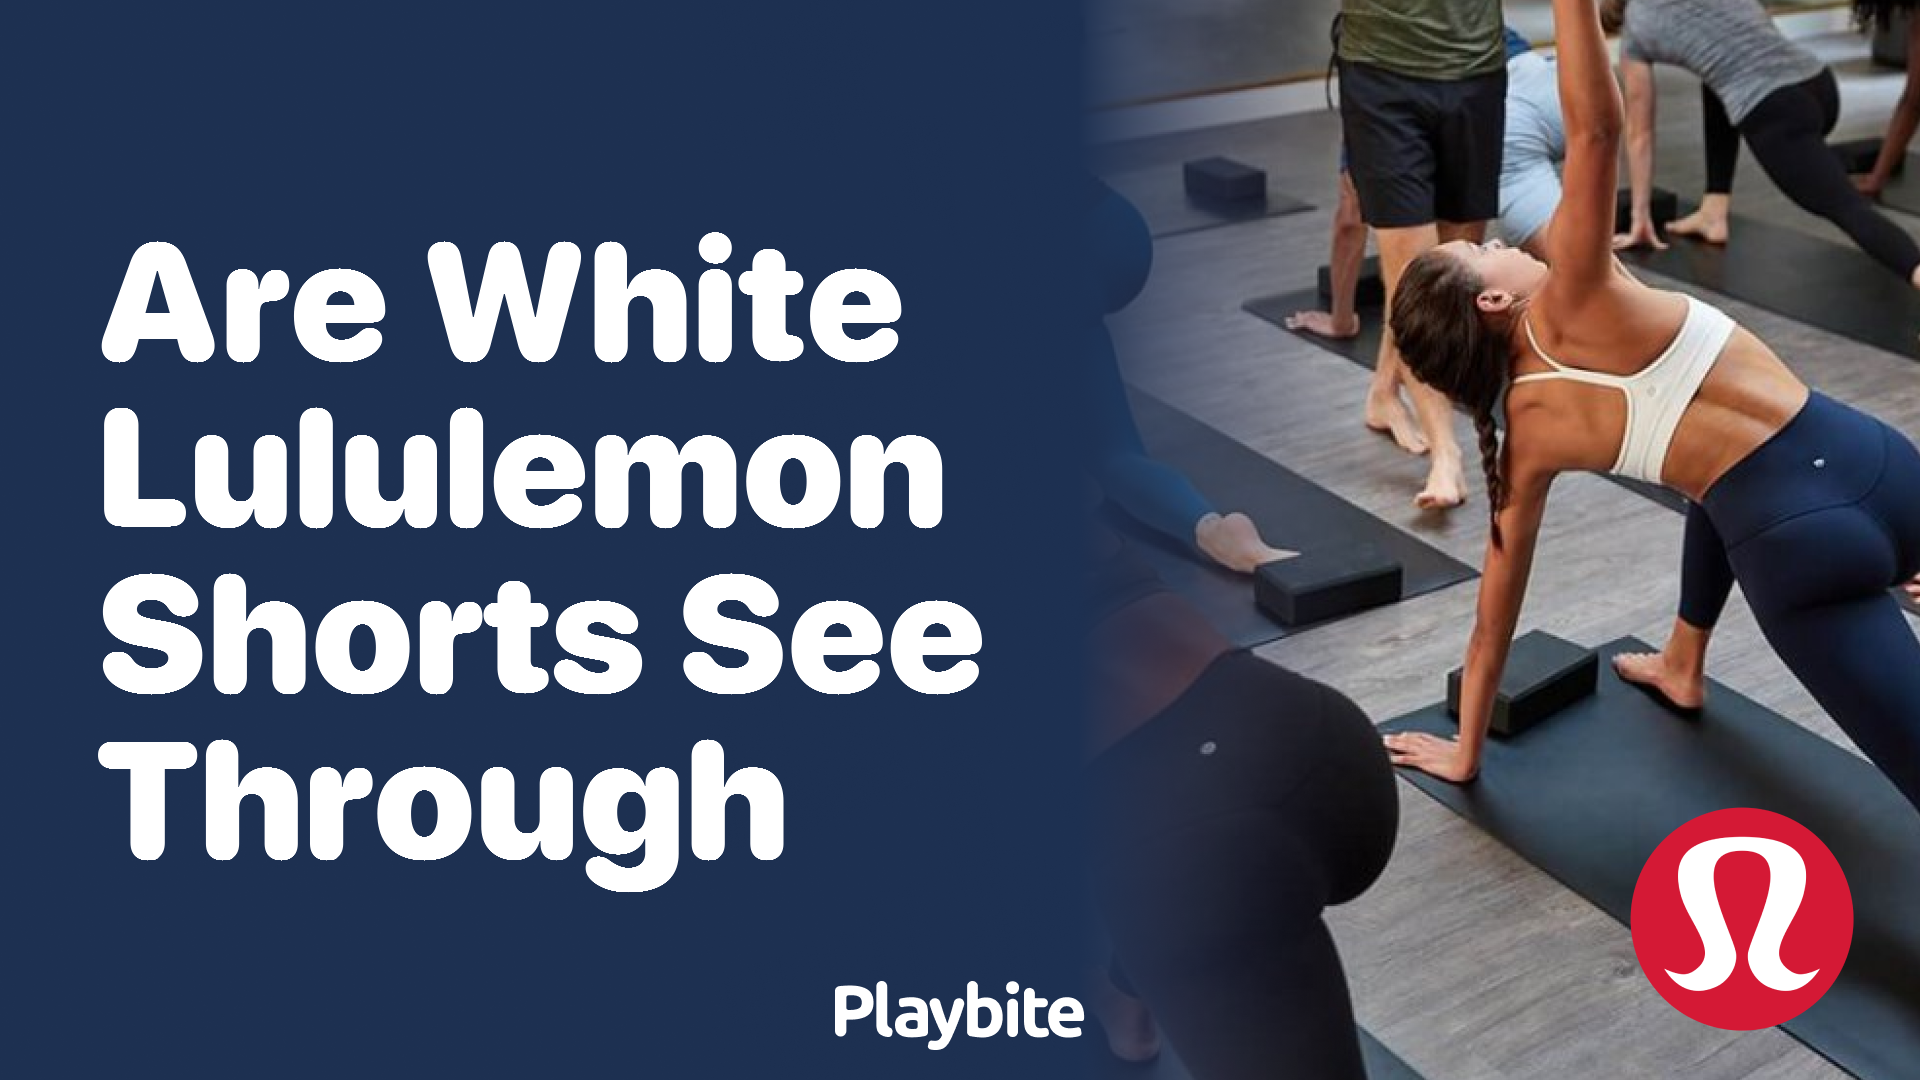 Are White Lululemon Shorts See-Through? Let's Find Out! - Playbite